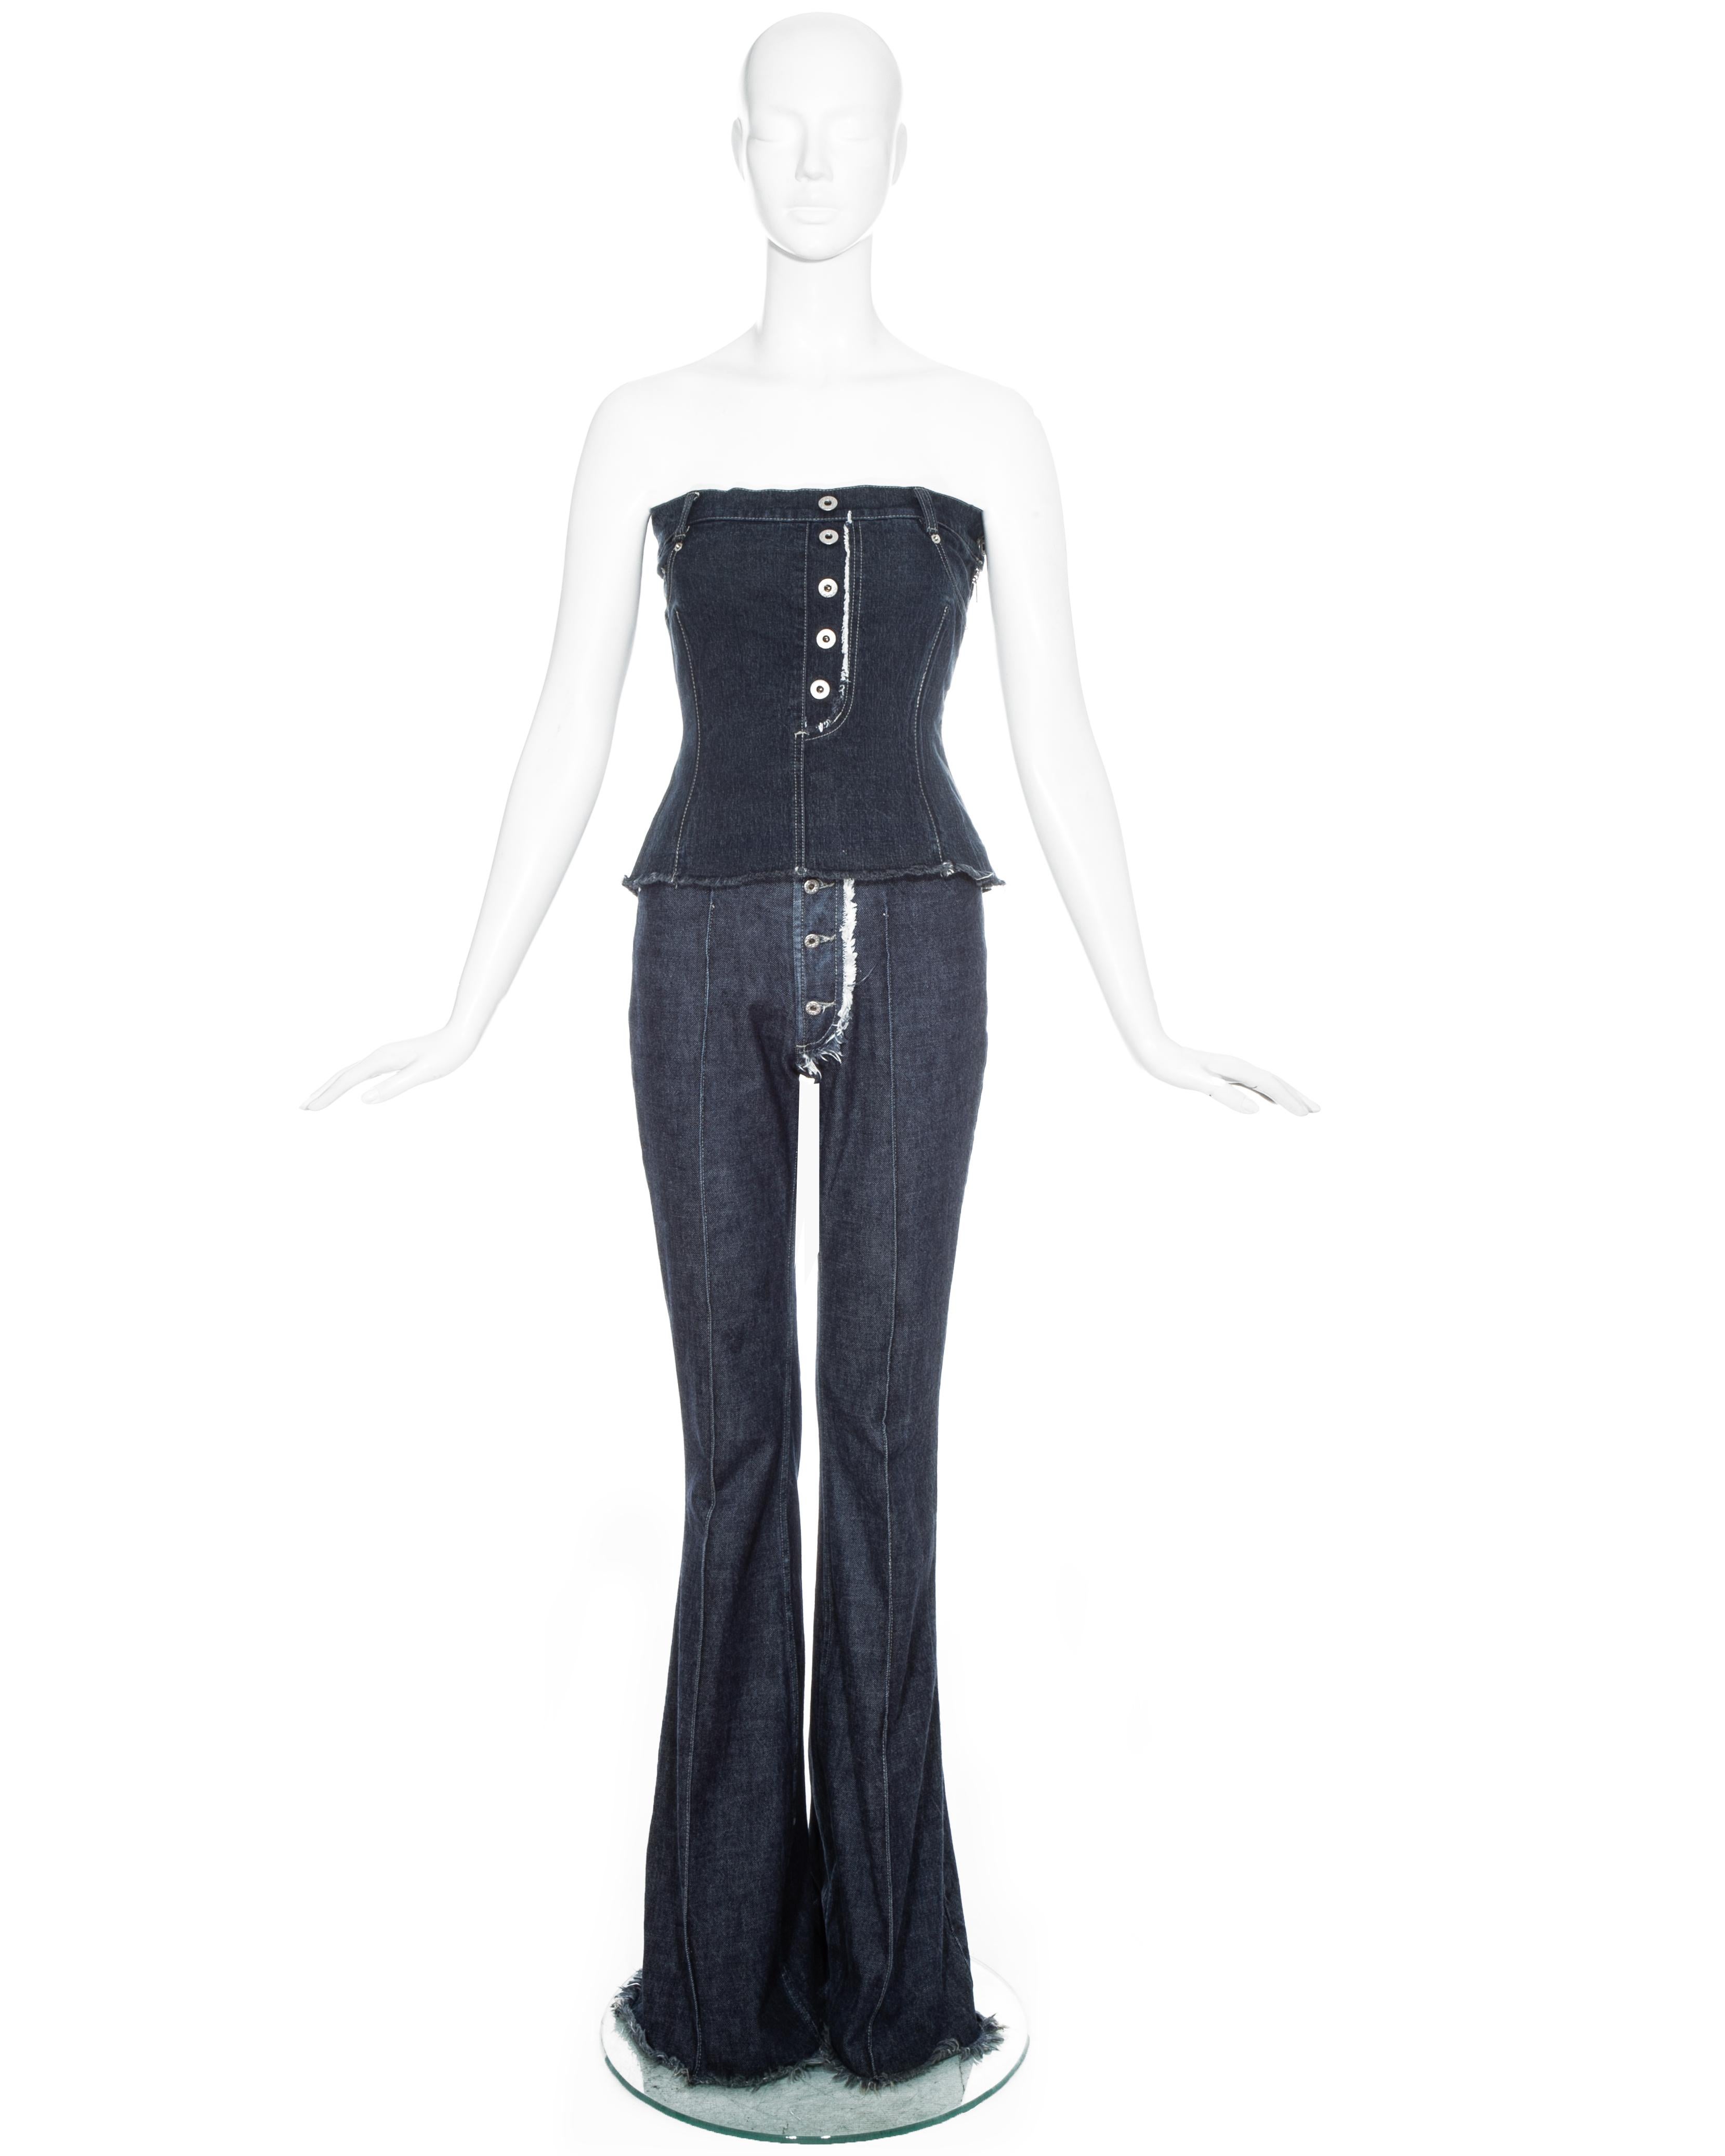 Alexander McQueen indigo denim bustier corset and high waisted flared jeans ensemble with contrast stitch and frayed trim. 

Fall-Winter 1996